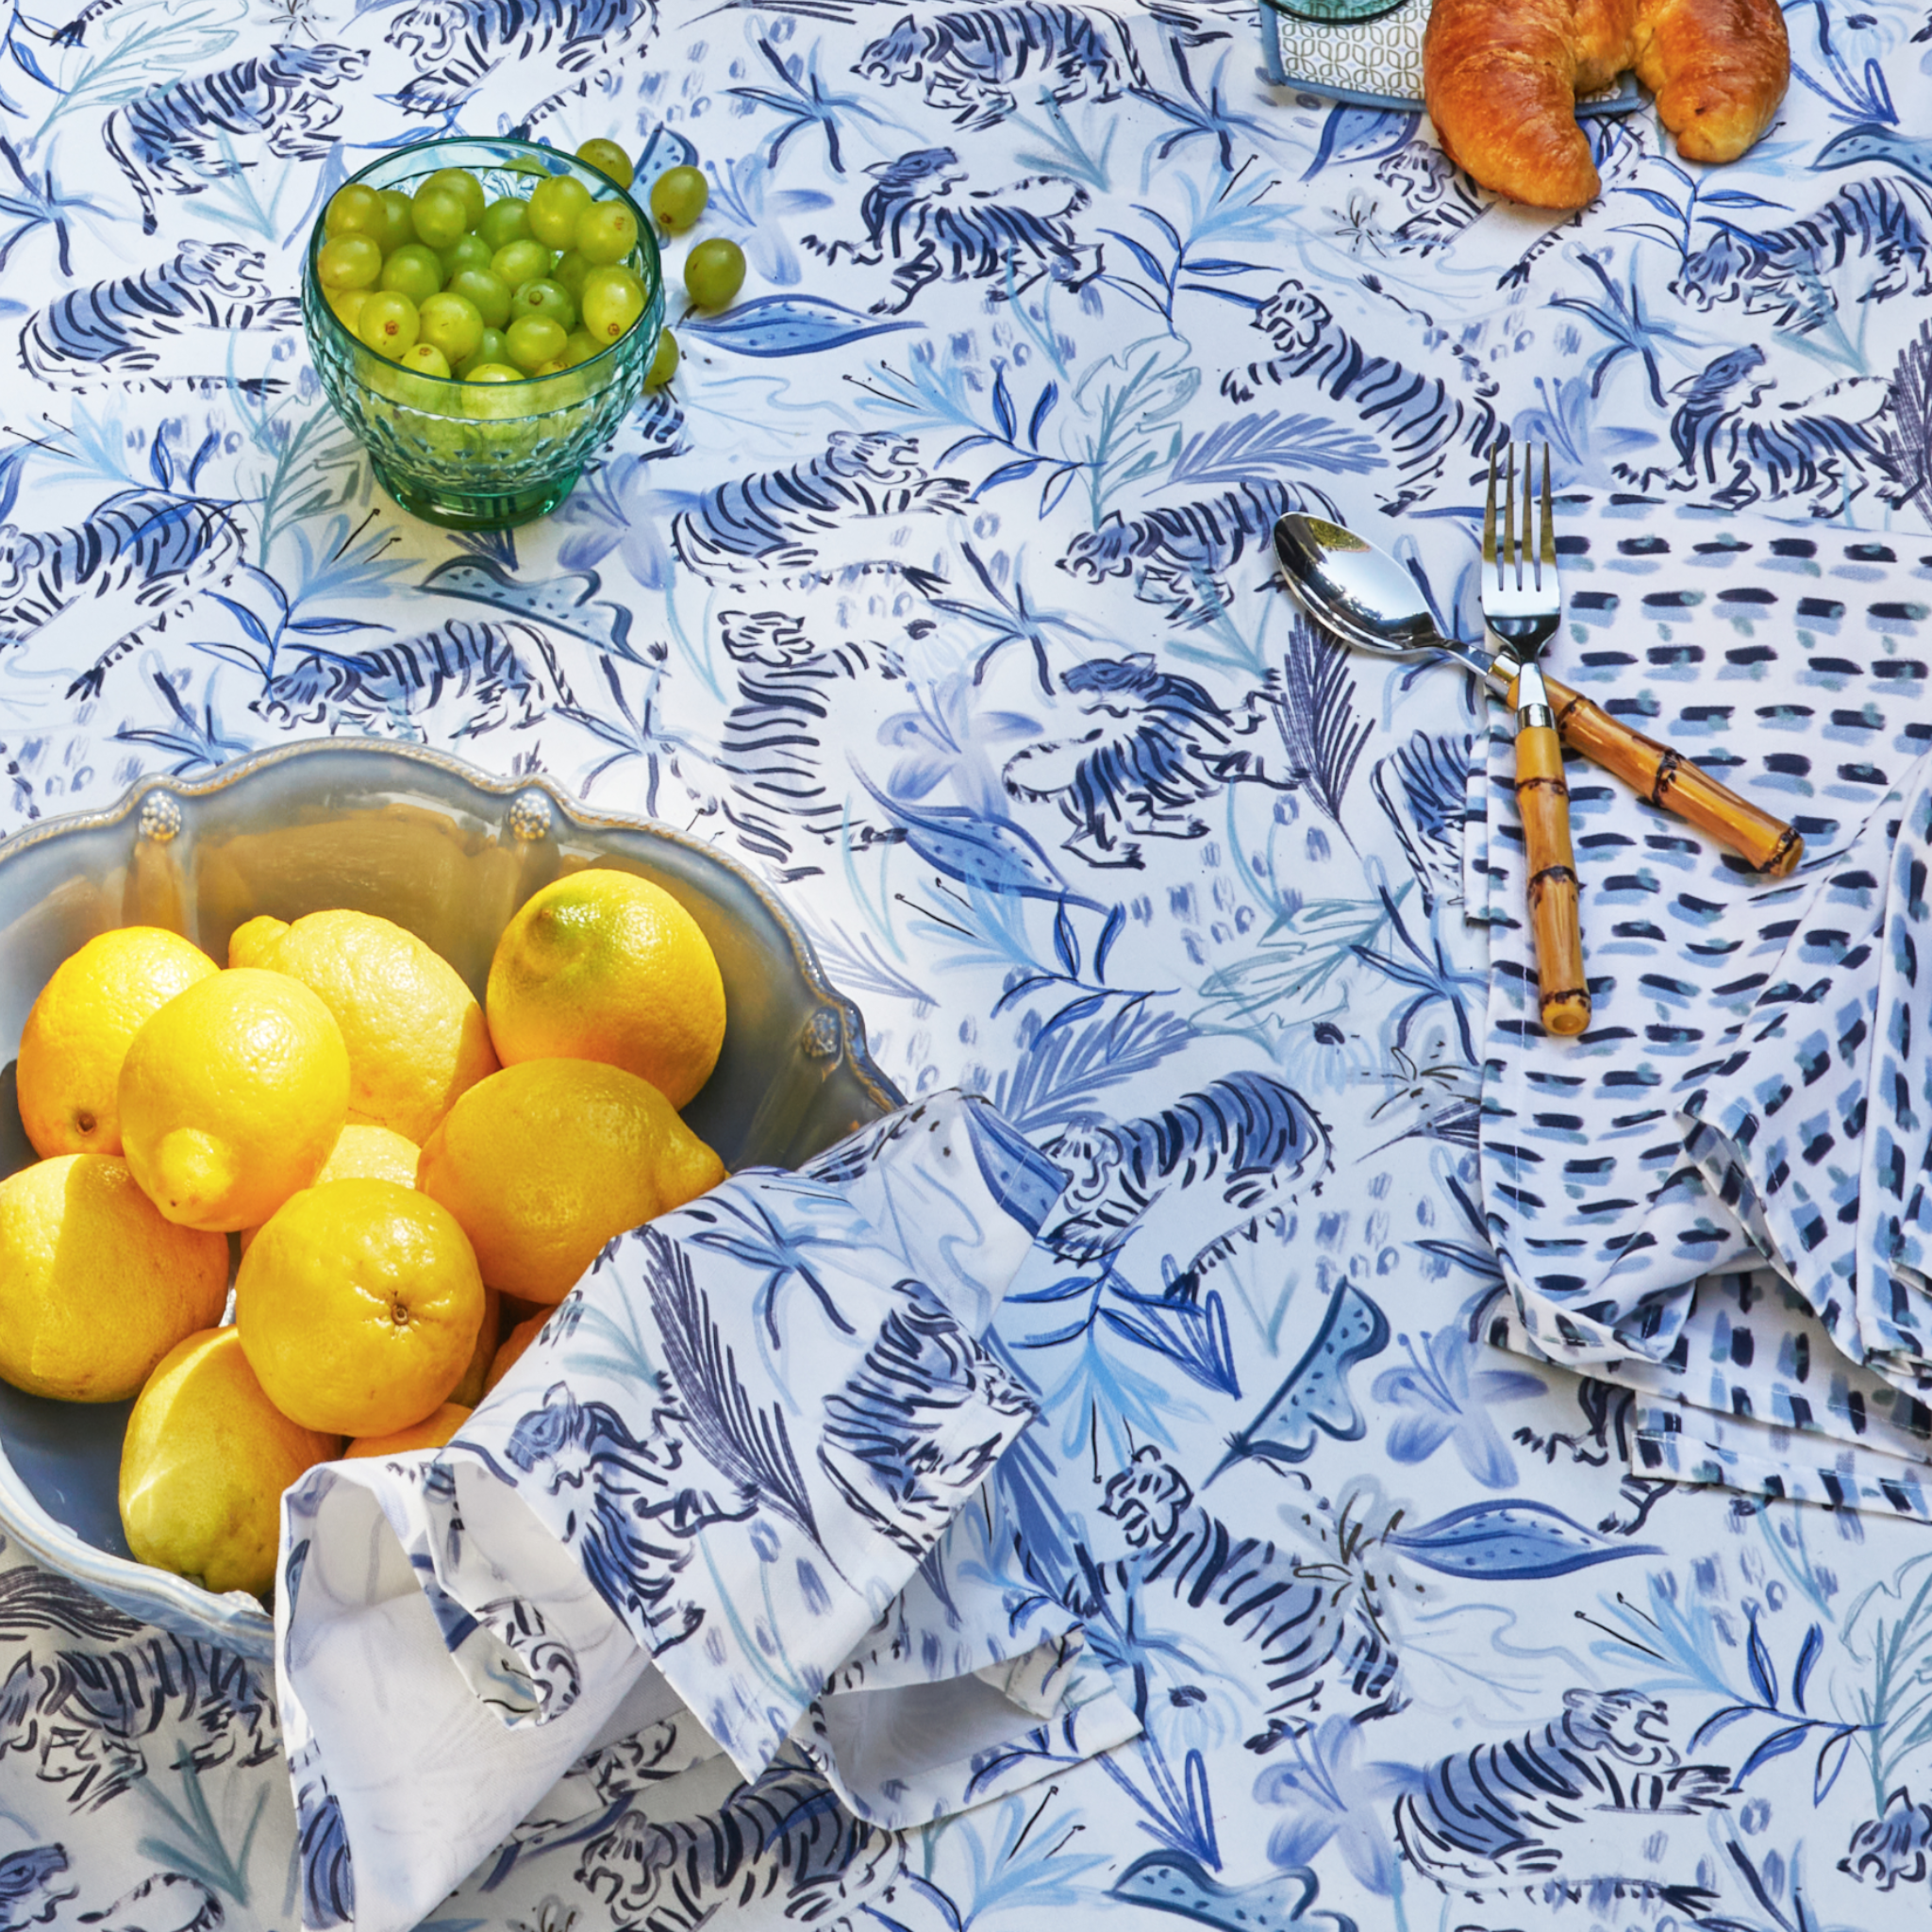 Table Close-Up with Blue With Intricate Tiger Design Printed Tablecloth and lemon bowl with Blue With Intricate Tiger Design Printed Napkin on top by glass of grapes